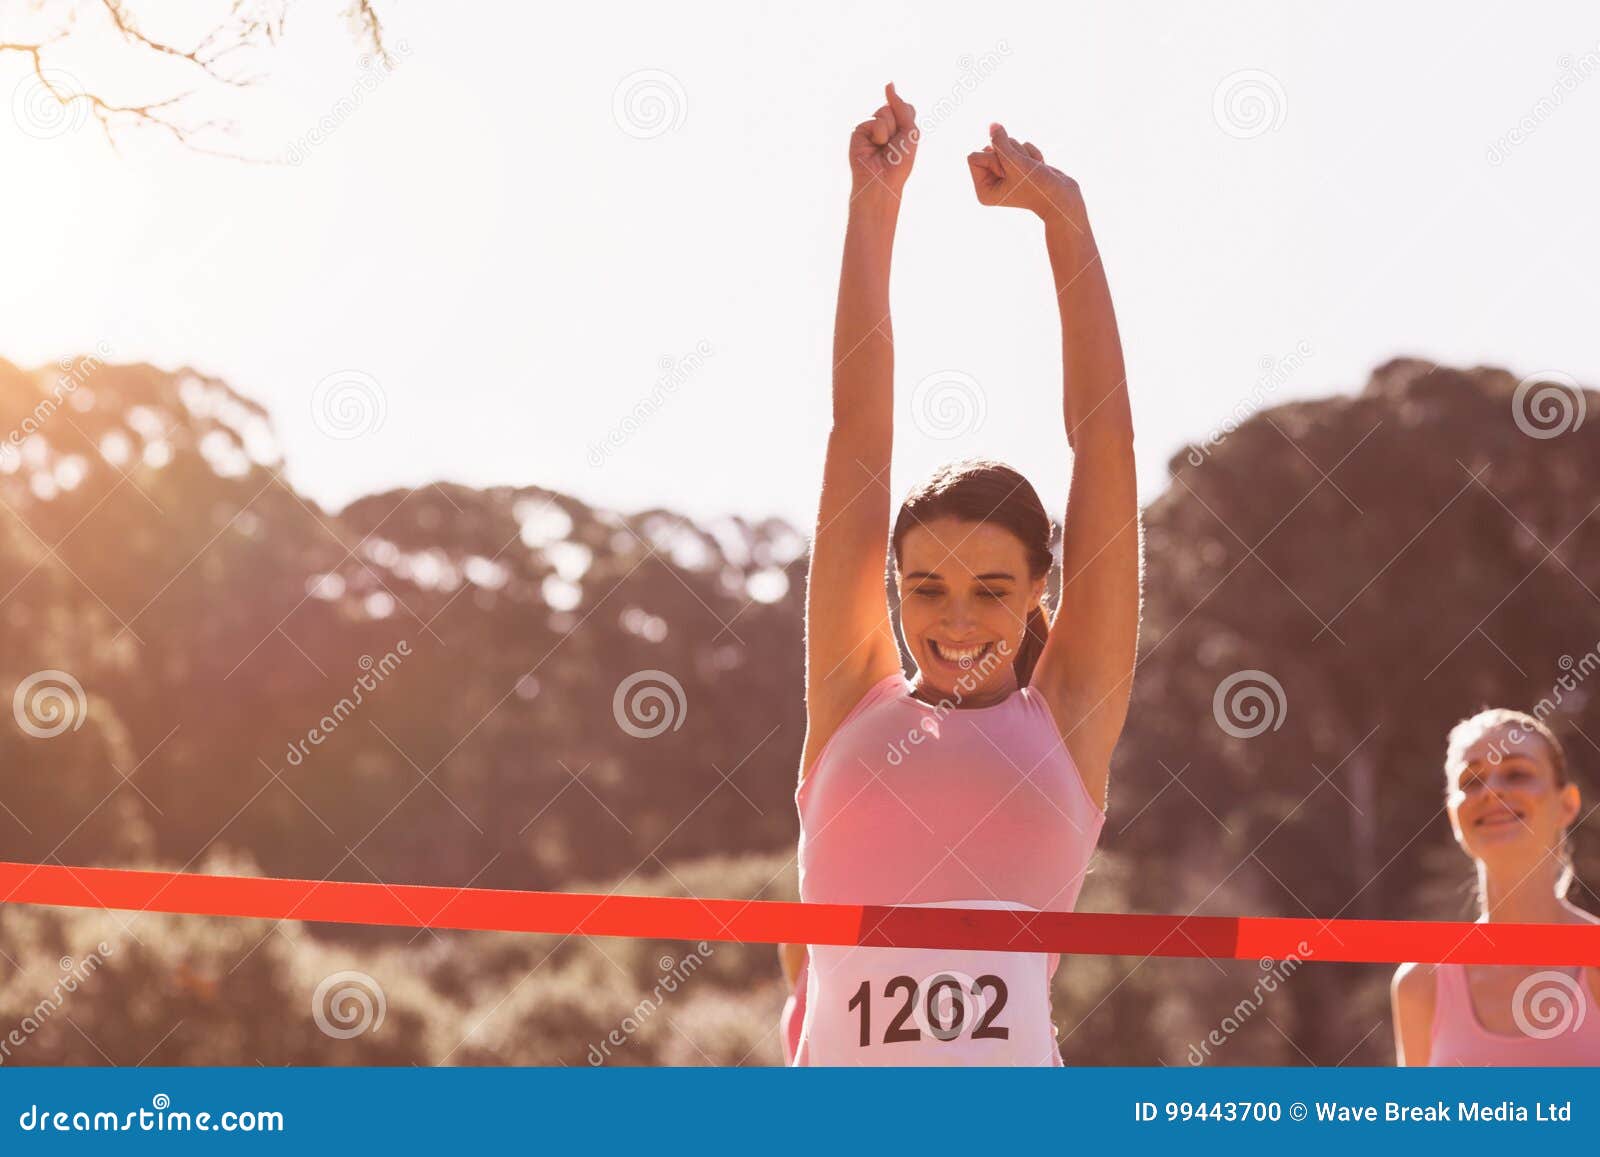 happy female athlete with arms raised crossing finish line